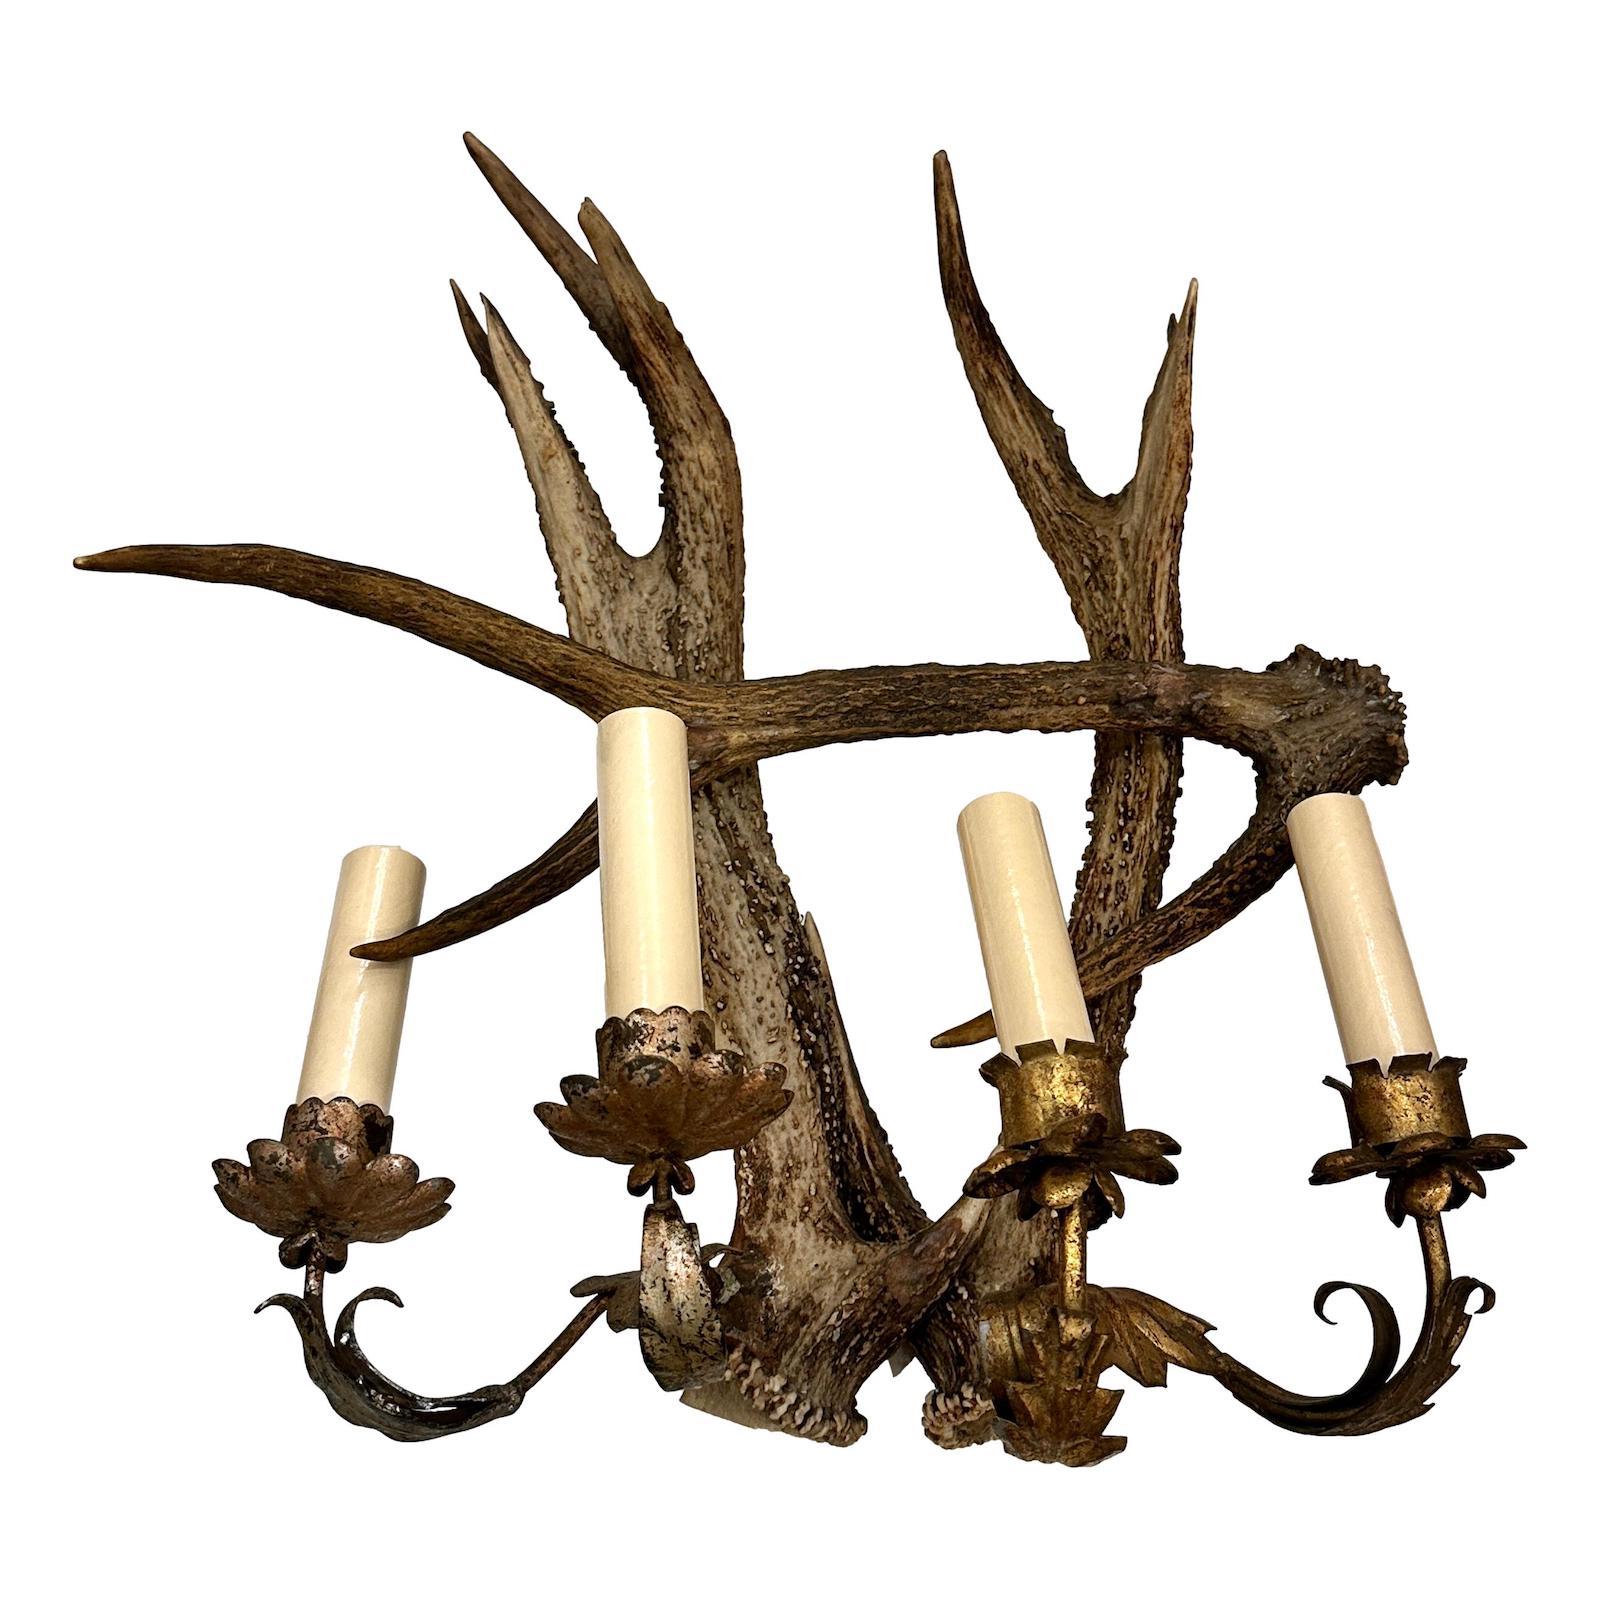 Pair of circa 1930's Northern Italian antler sconces with four gilt metal arms each.

Measurements:
Height: 18